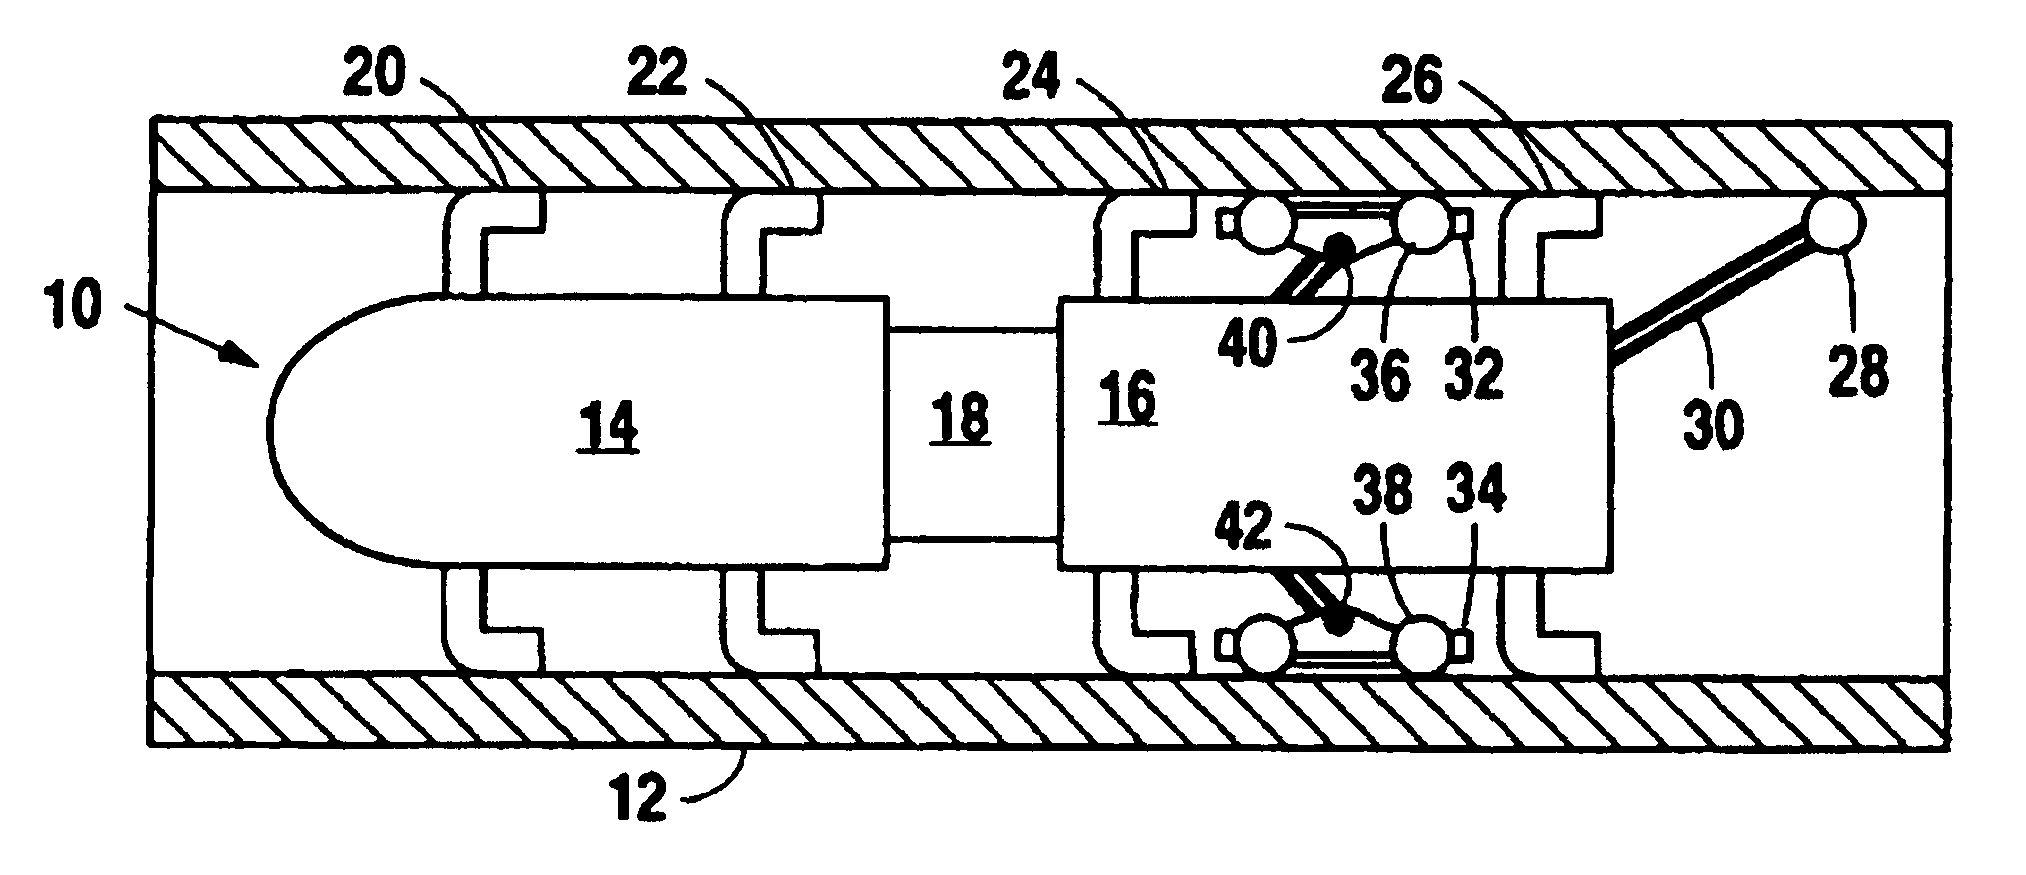 Method and apparatus for inspecting pipelines from an in-line inspection vehicle using magnetostrictive probes